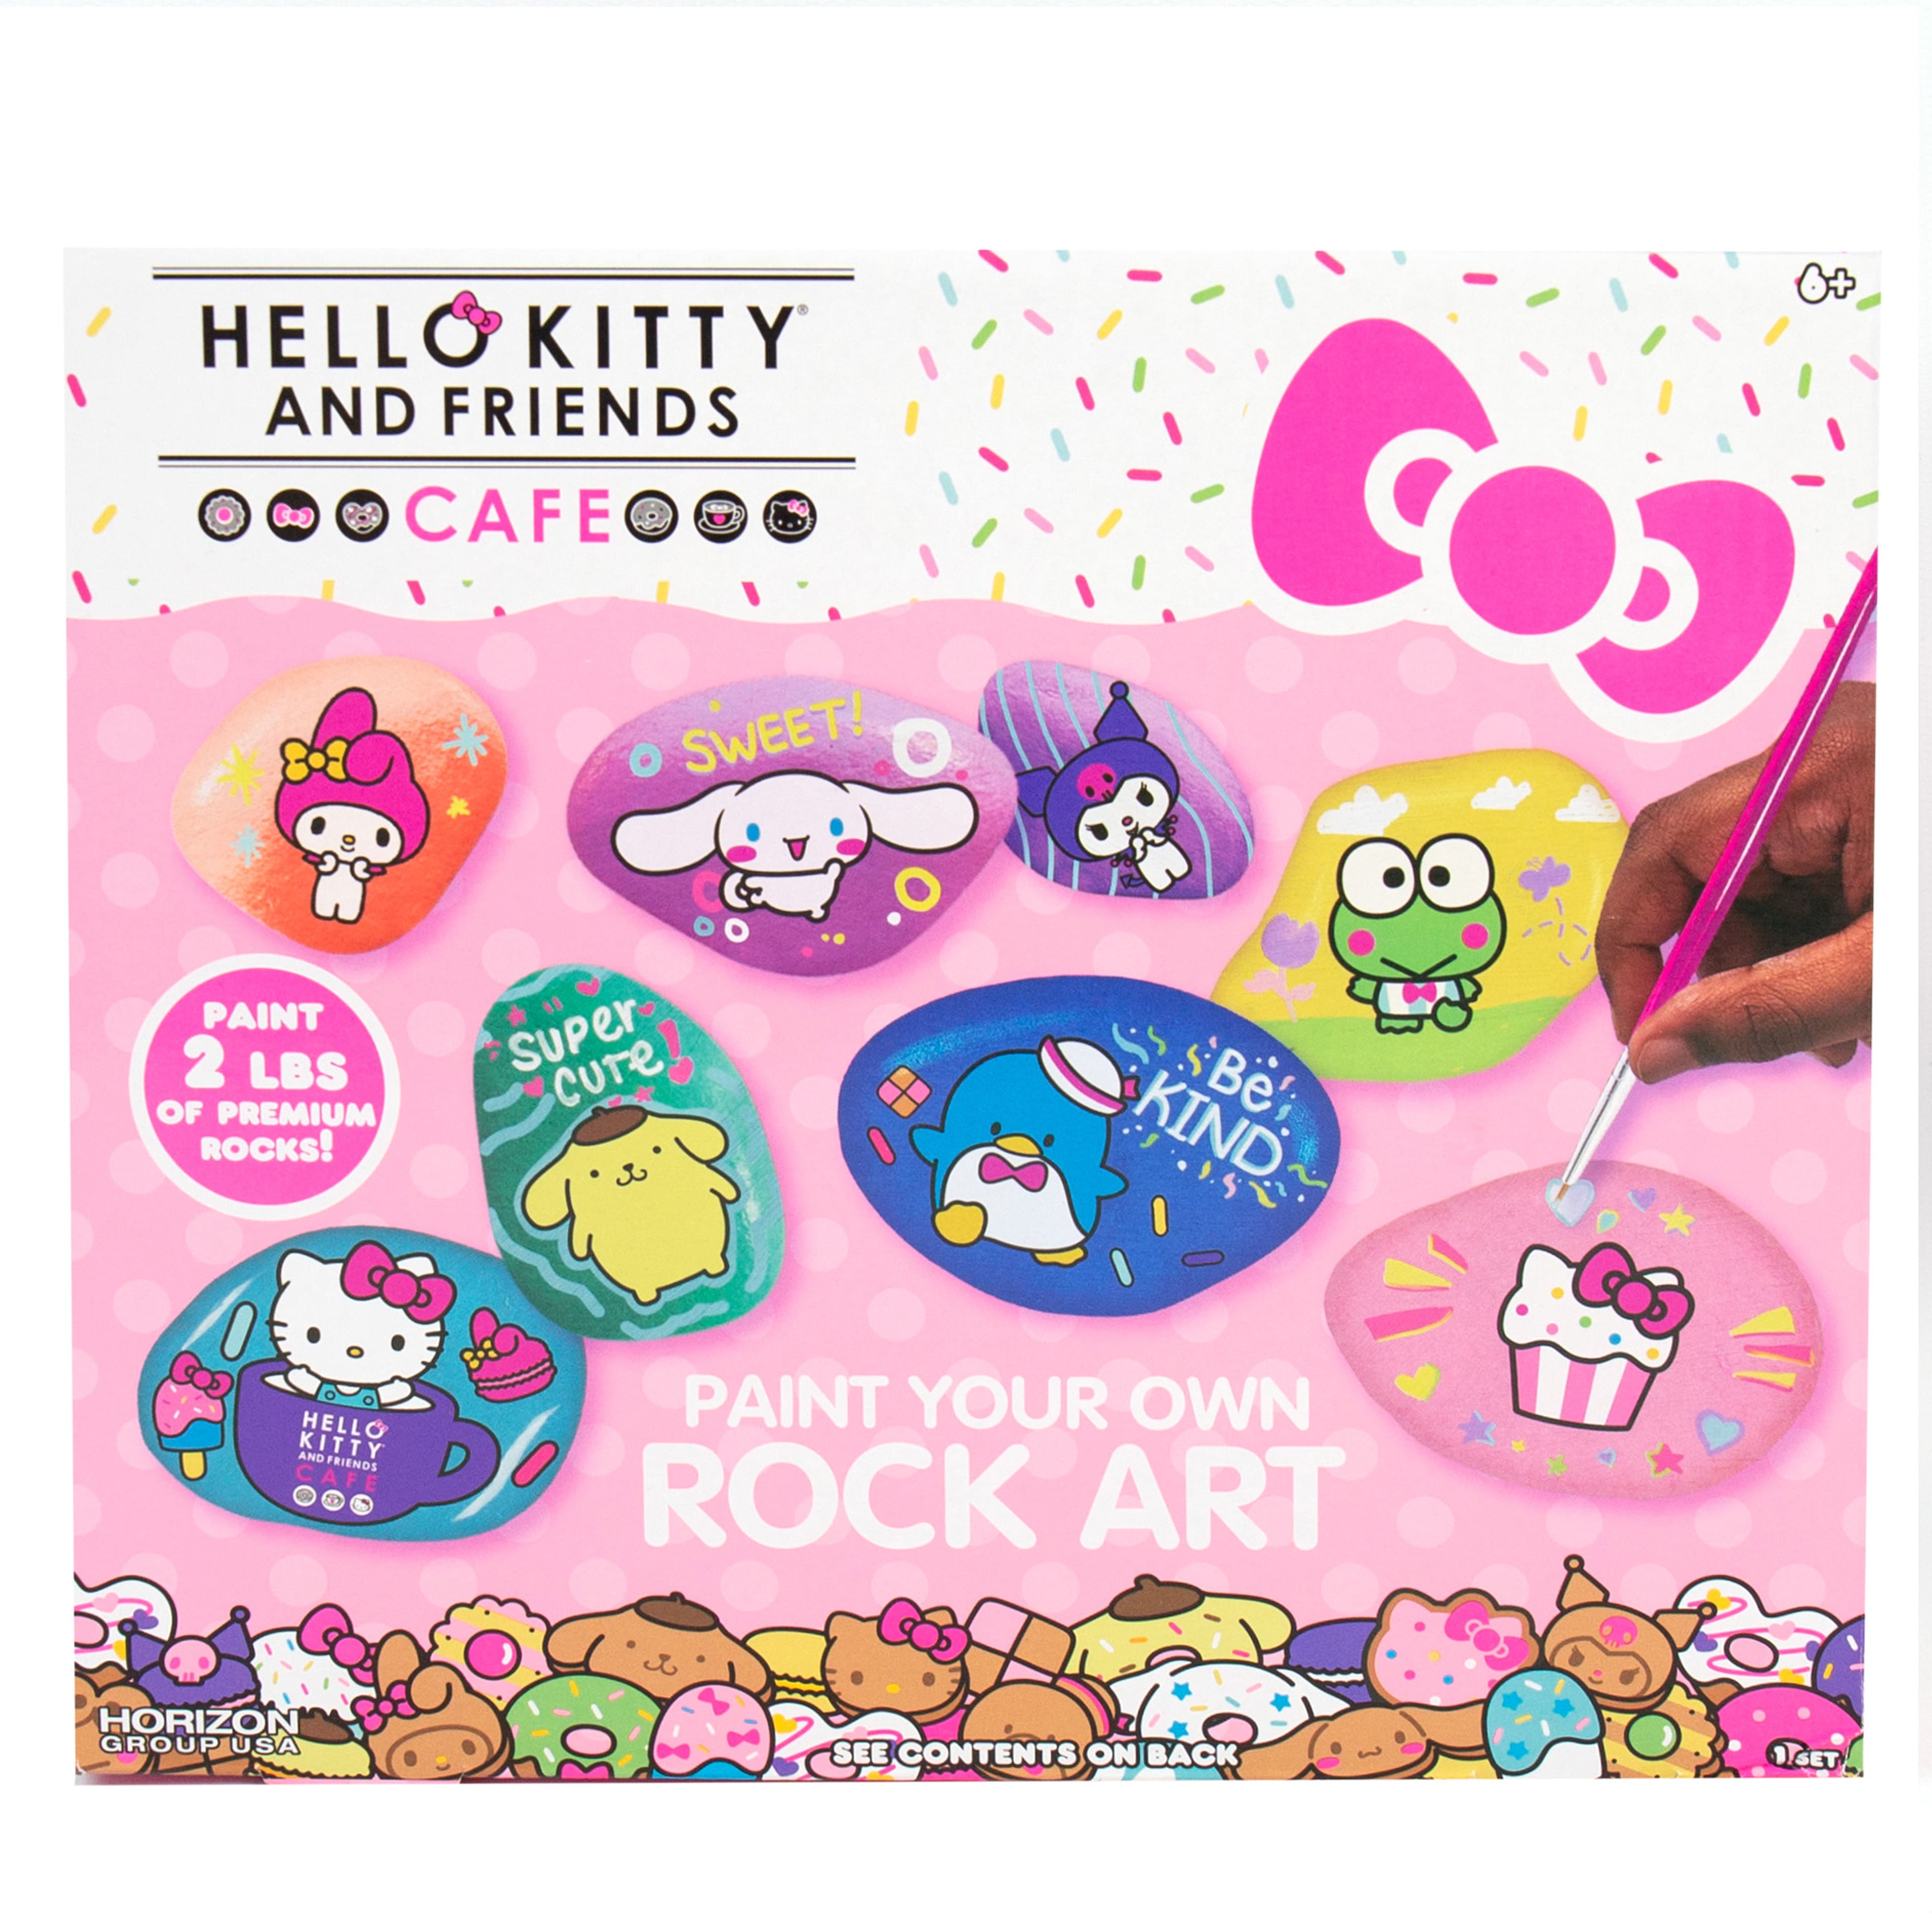 Sanrio mini sticker books, I've stopped collecting these, b…